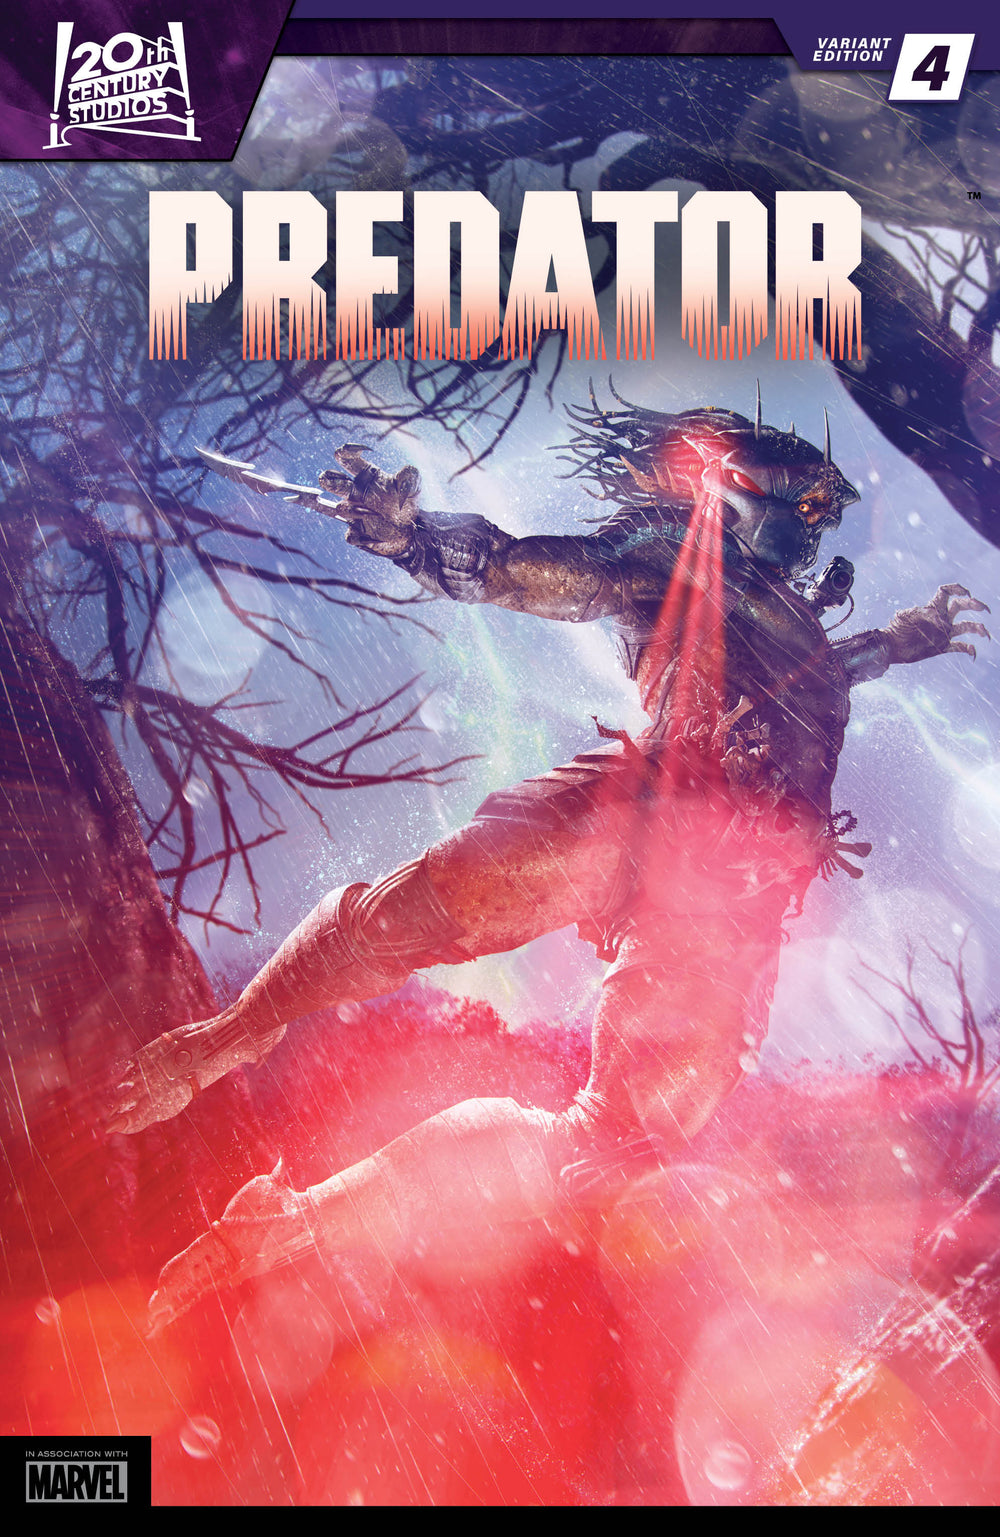 PREDATOR #4 Rahzzah Trade Dress Exclusive! (Limited to ONLY 500 with COA)